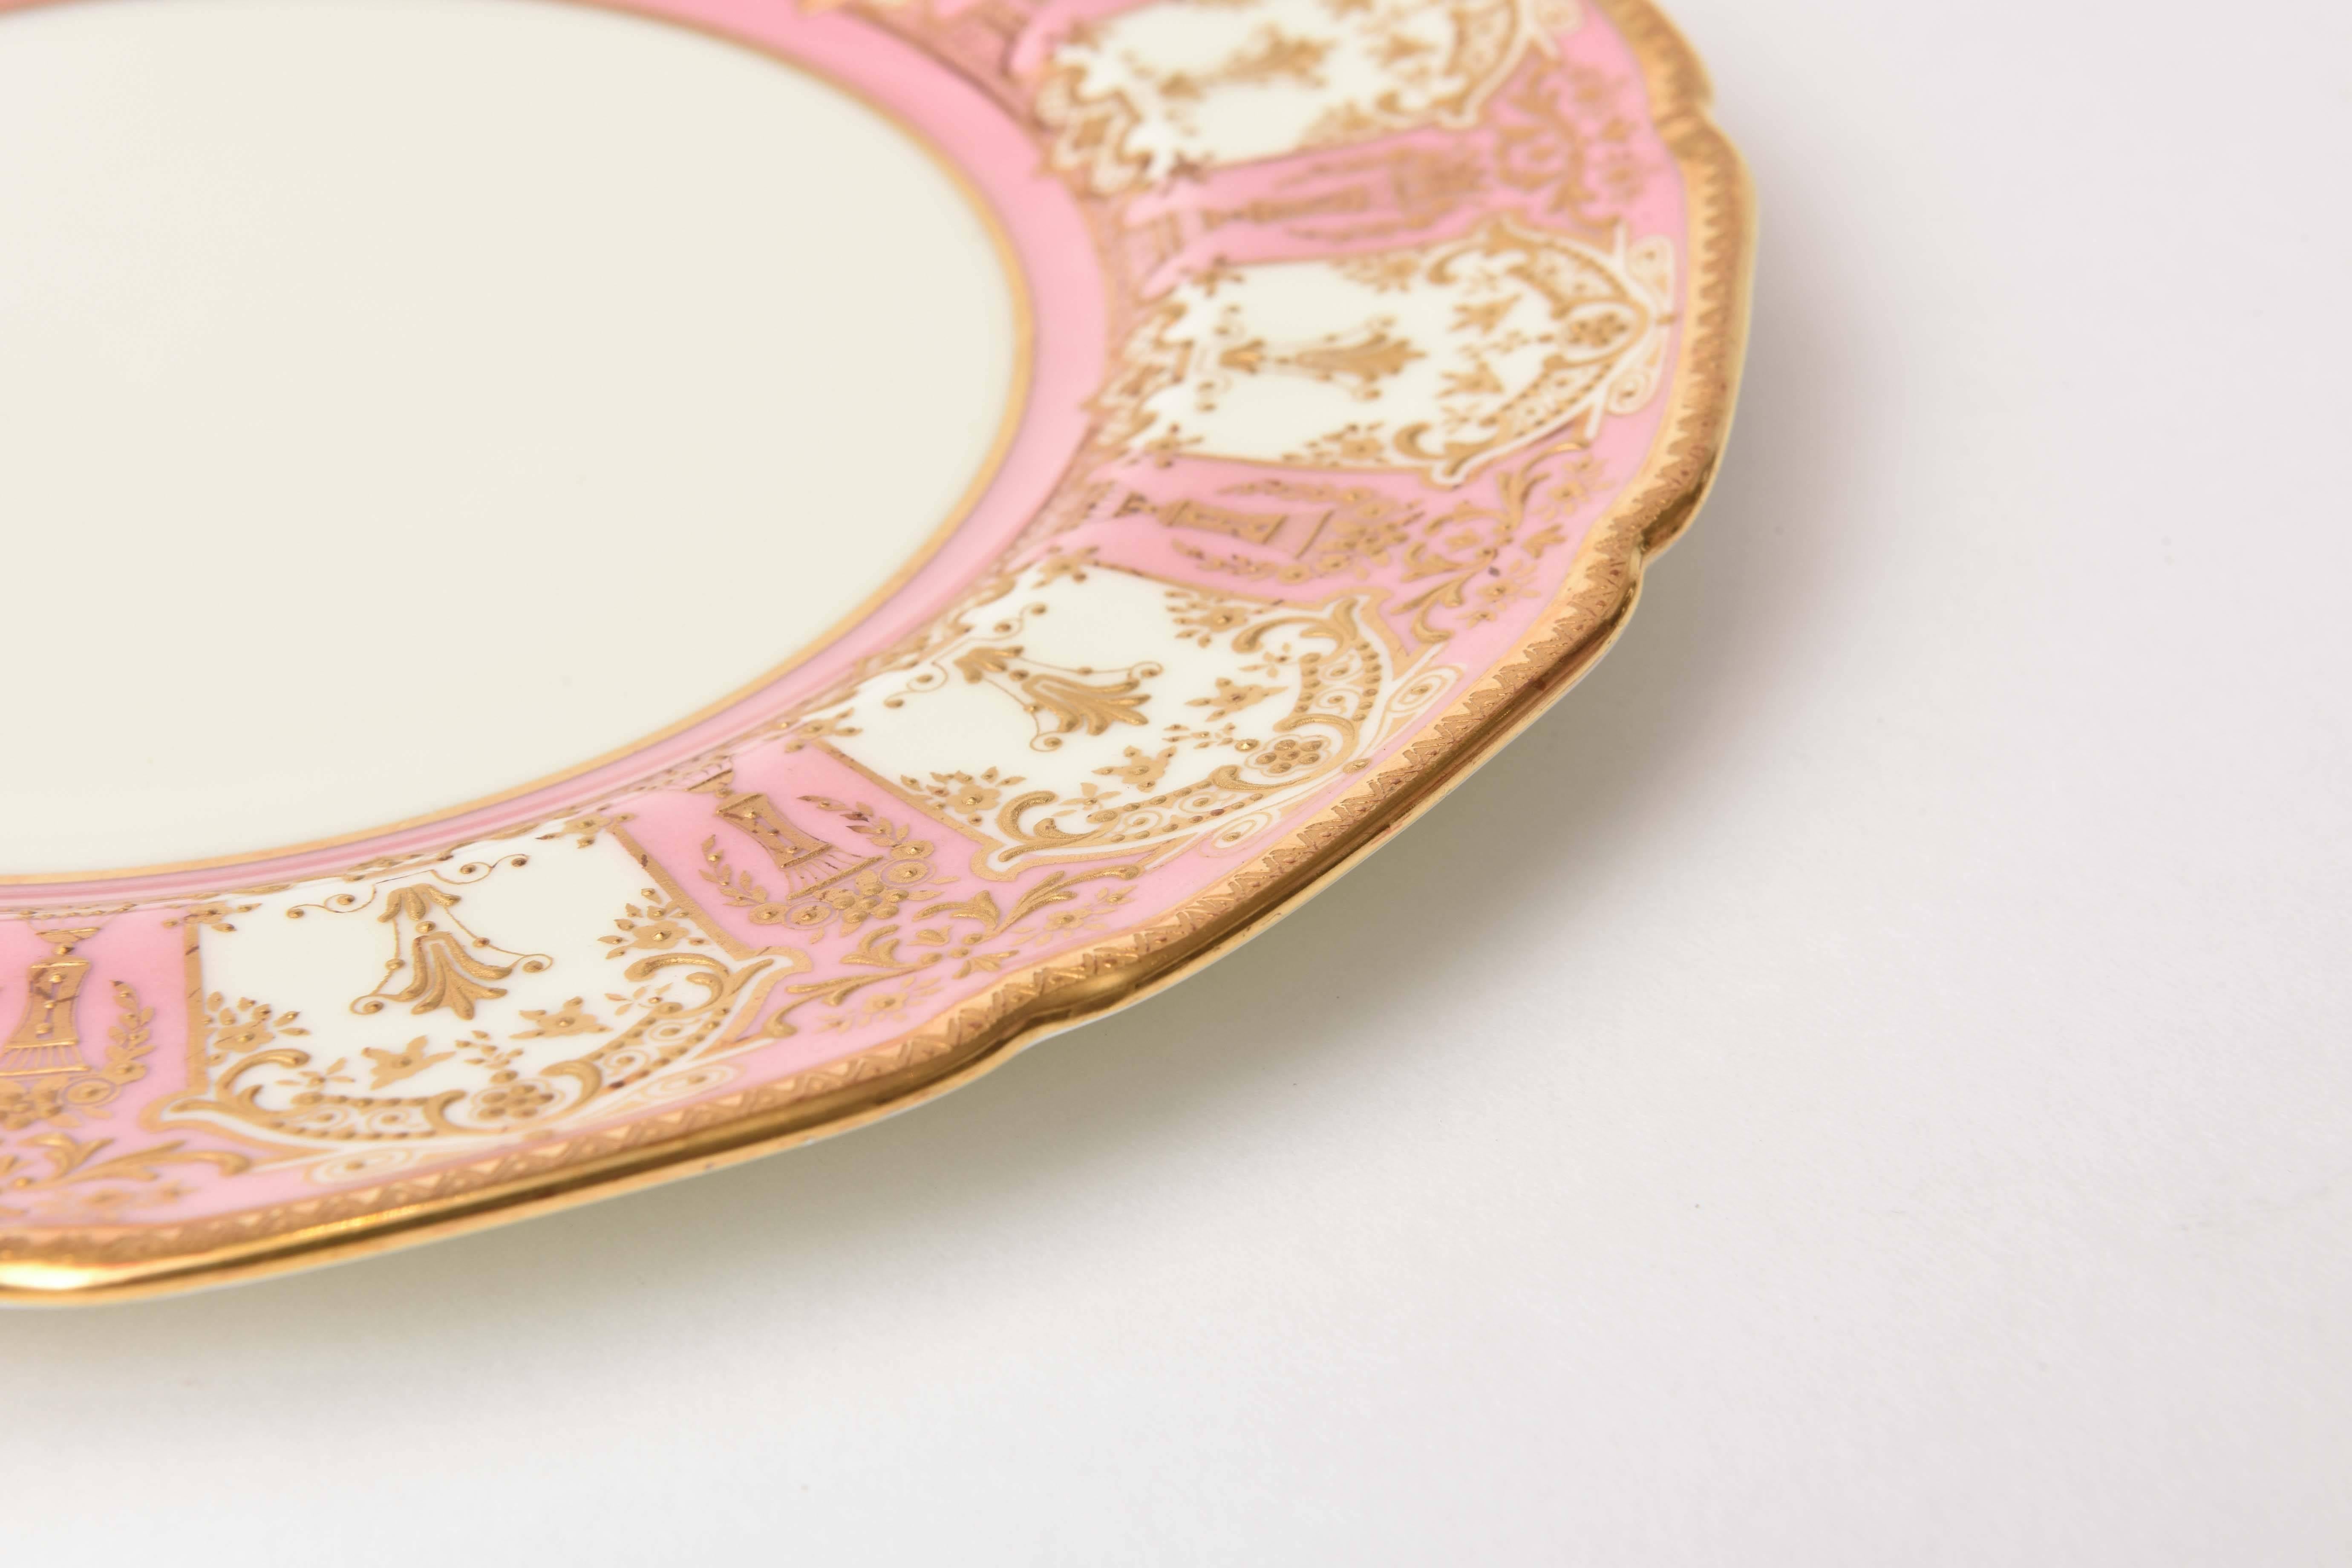 12 Exquisite Pink and Heavily Gilded Dessert or Salad Plates, Antique English 2